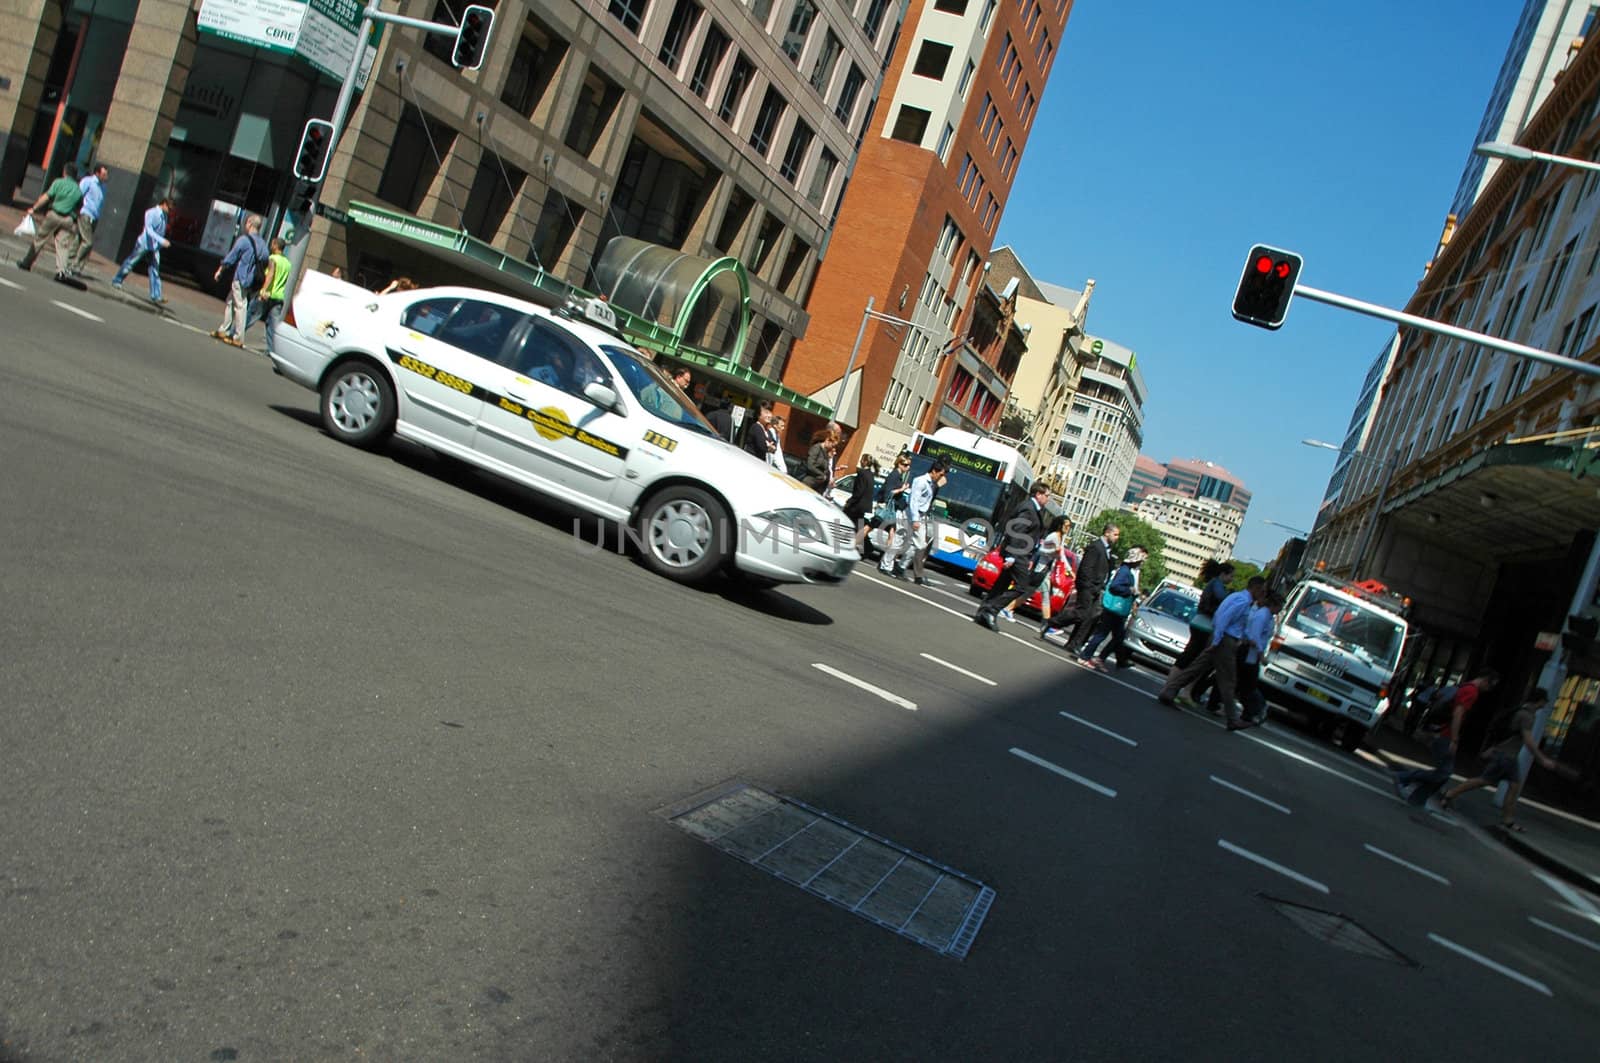 sydney traffic, white taxi passing by, walking pedestrians 